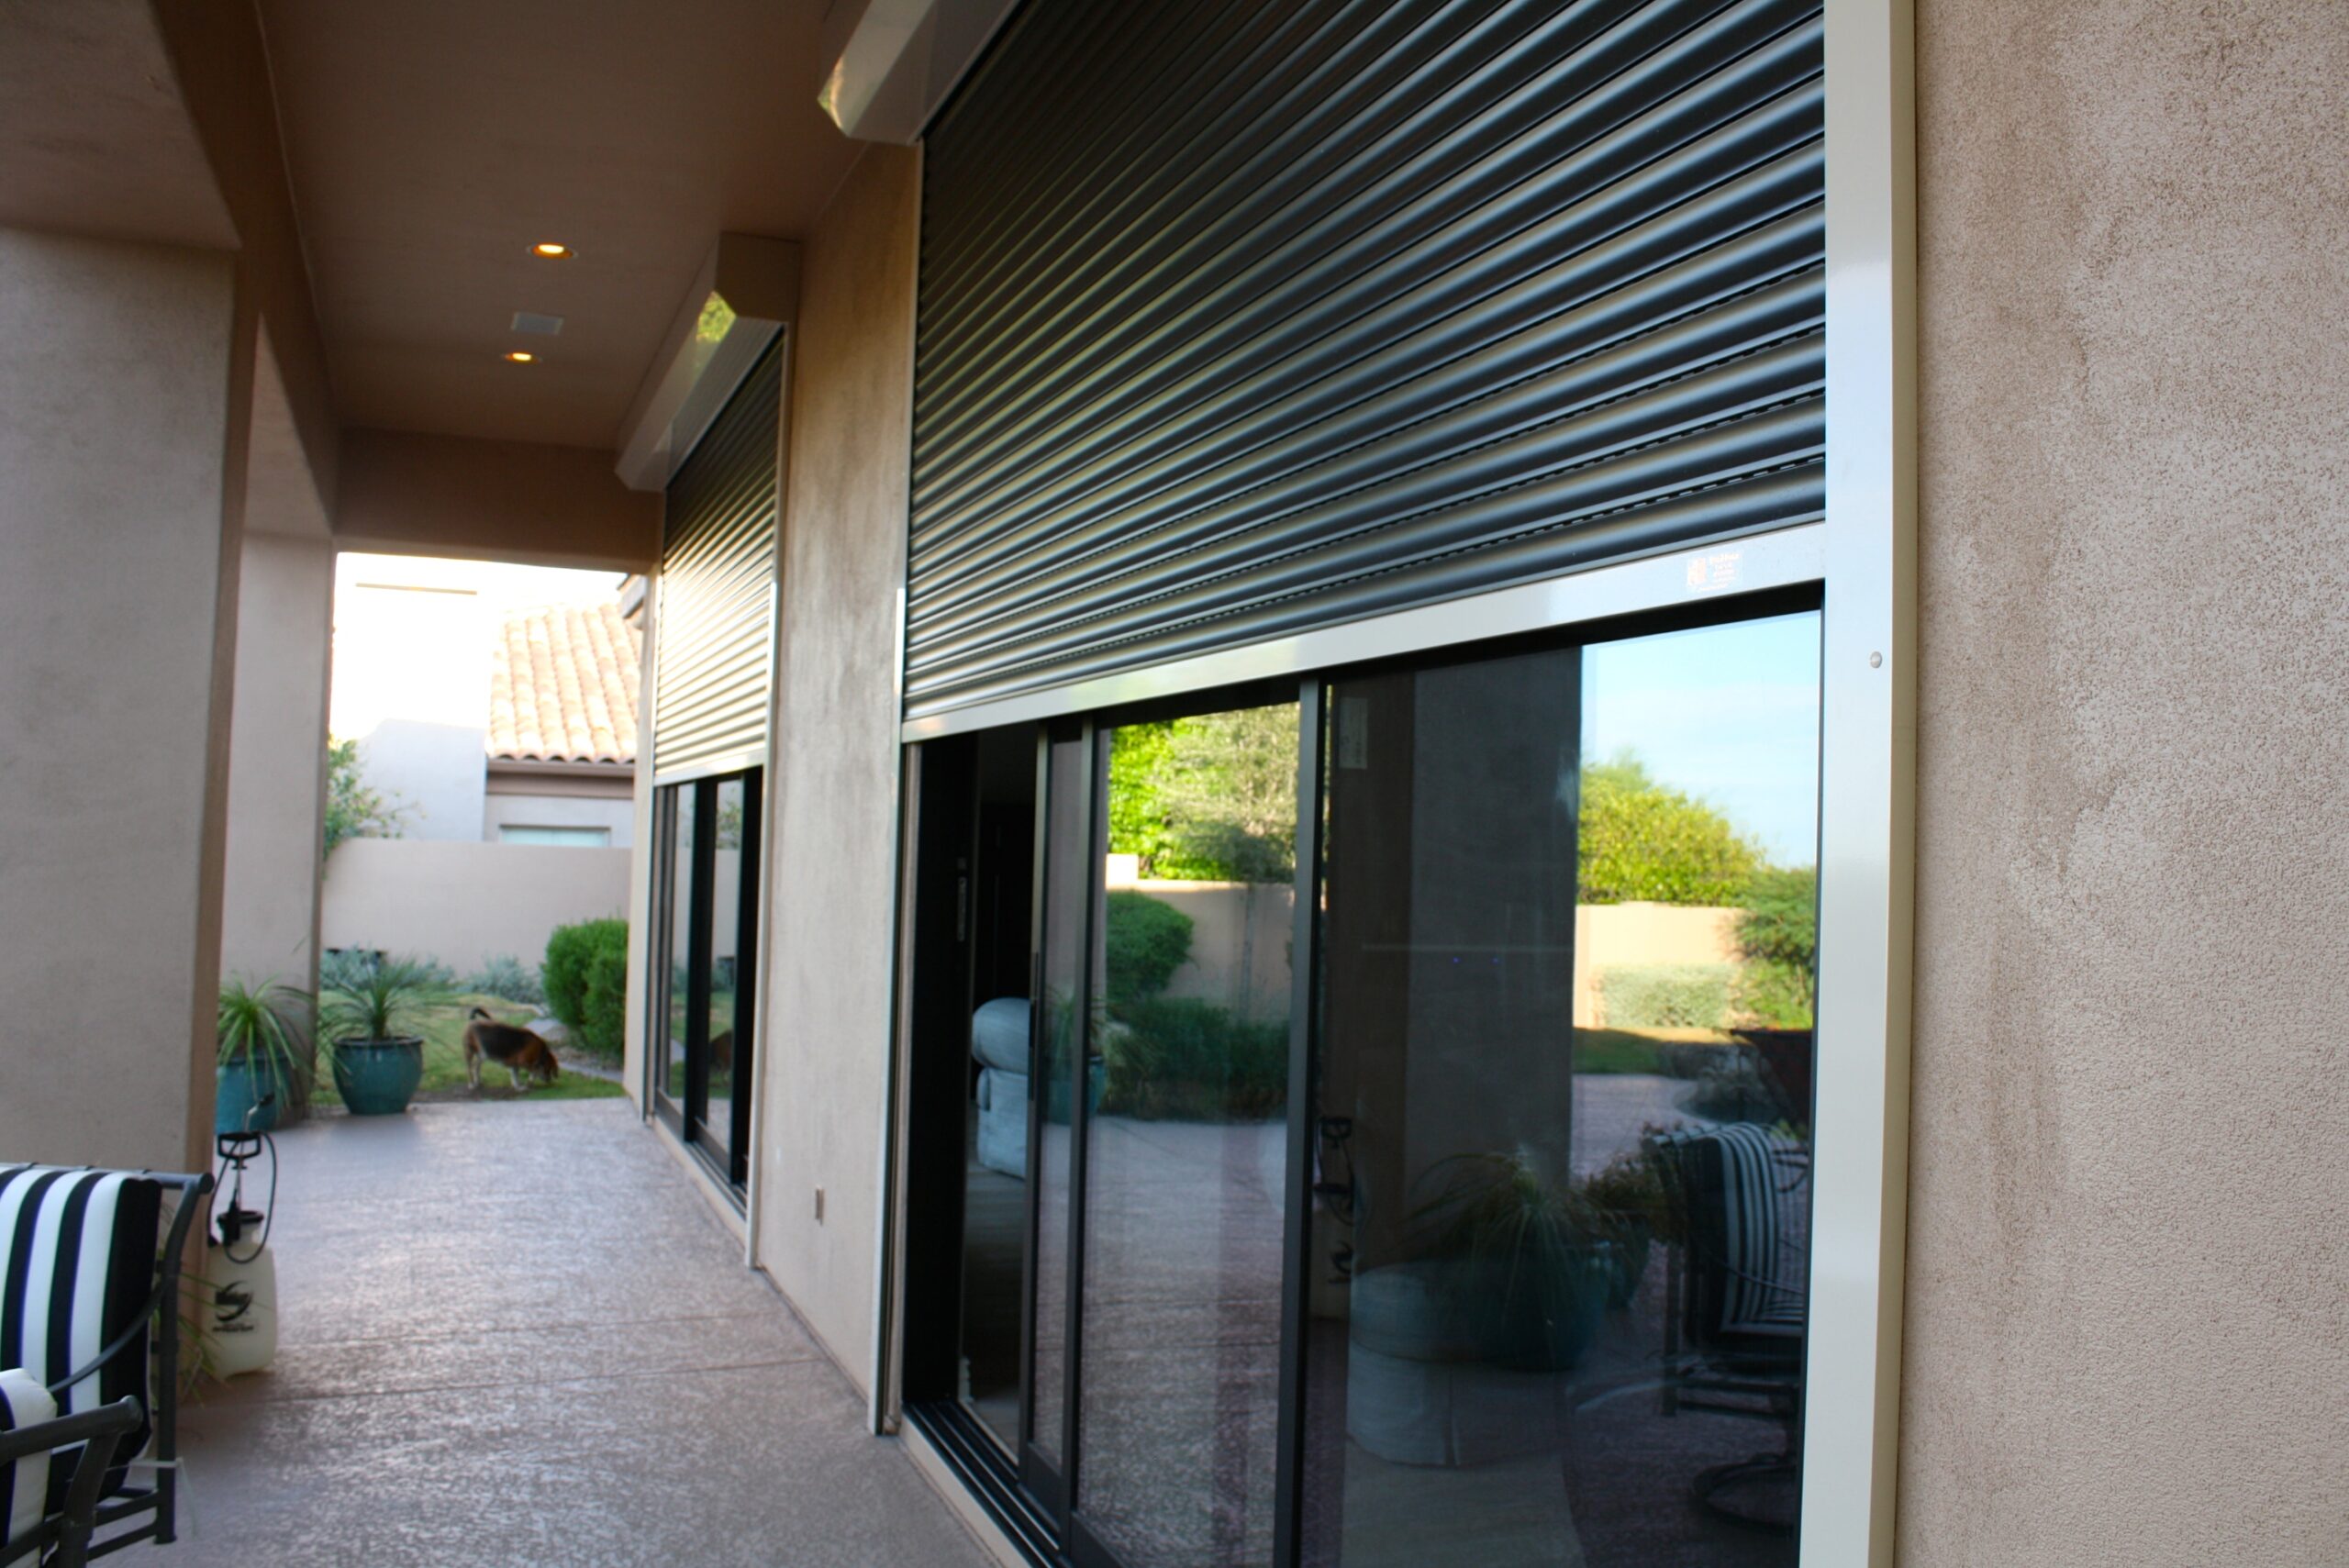 An image showing a halfway opened rolling shutters installed outside of a home's glass doors